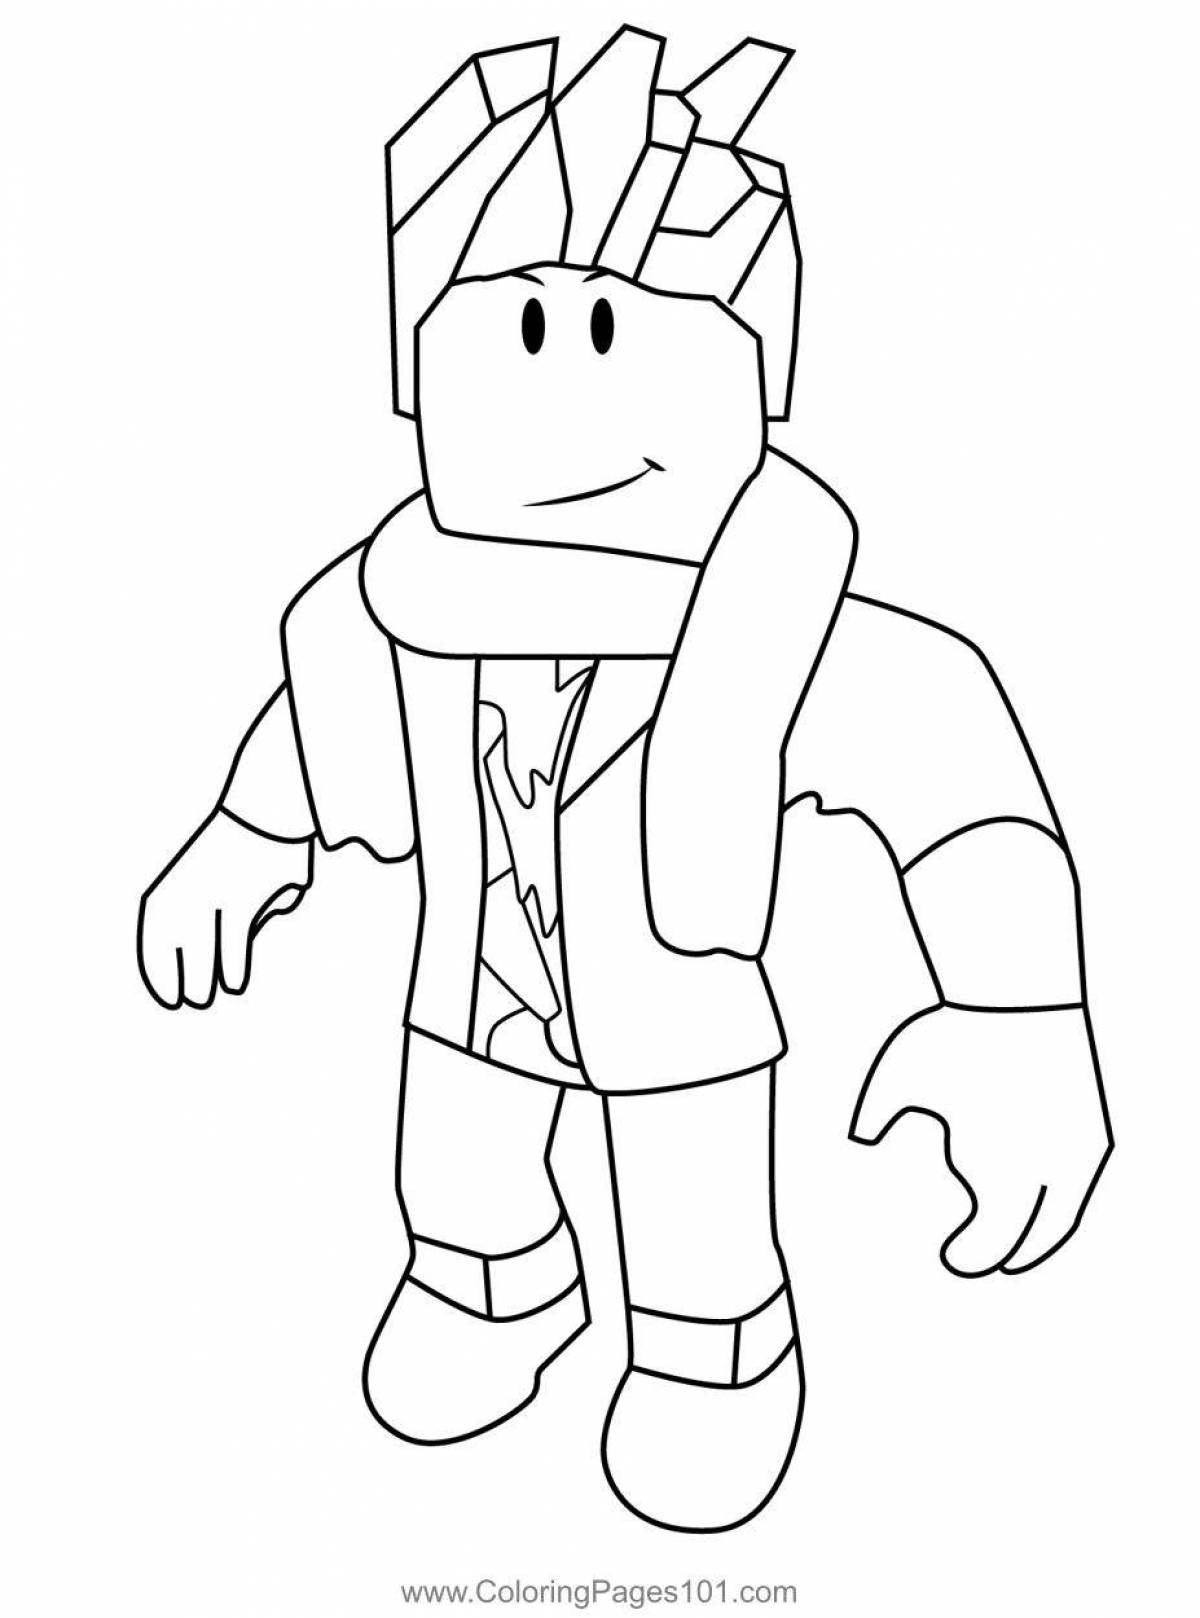 Colorful roblox player coloring page